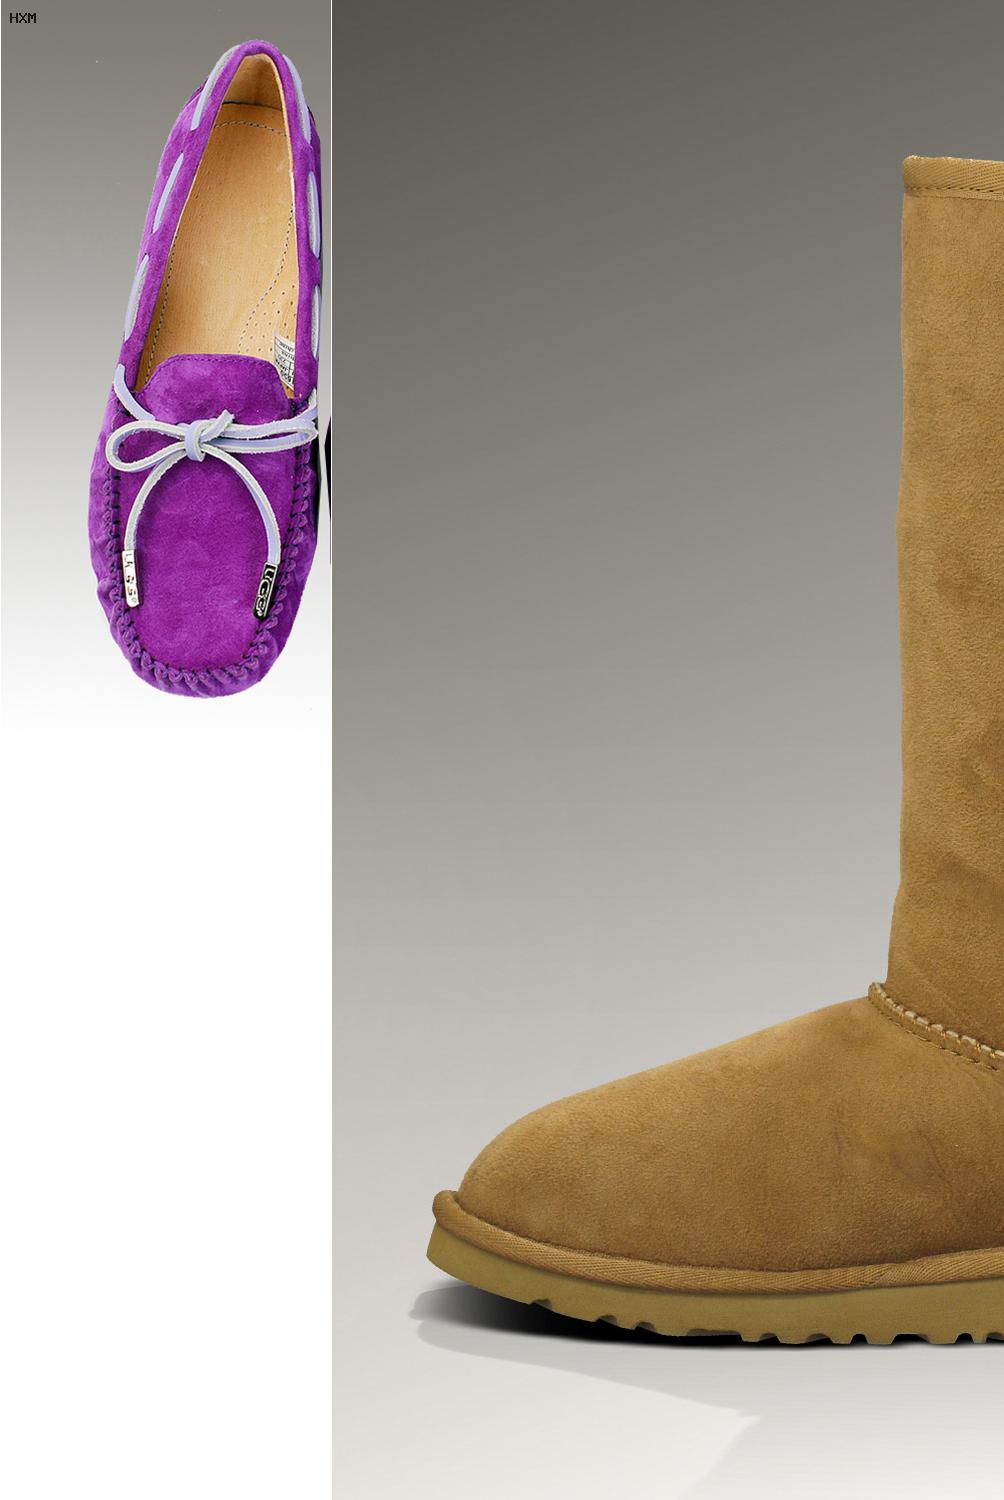 ugg boots cost in america